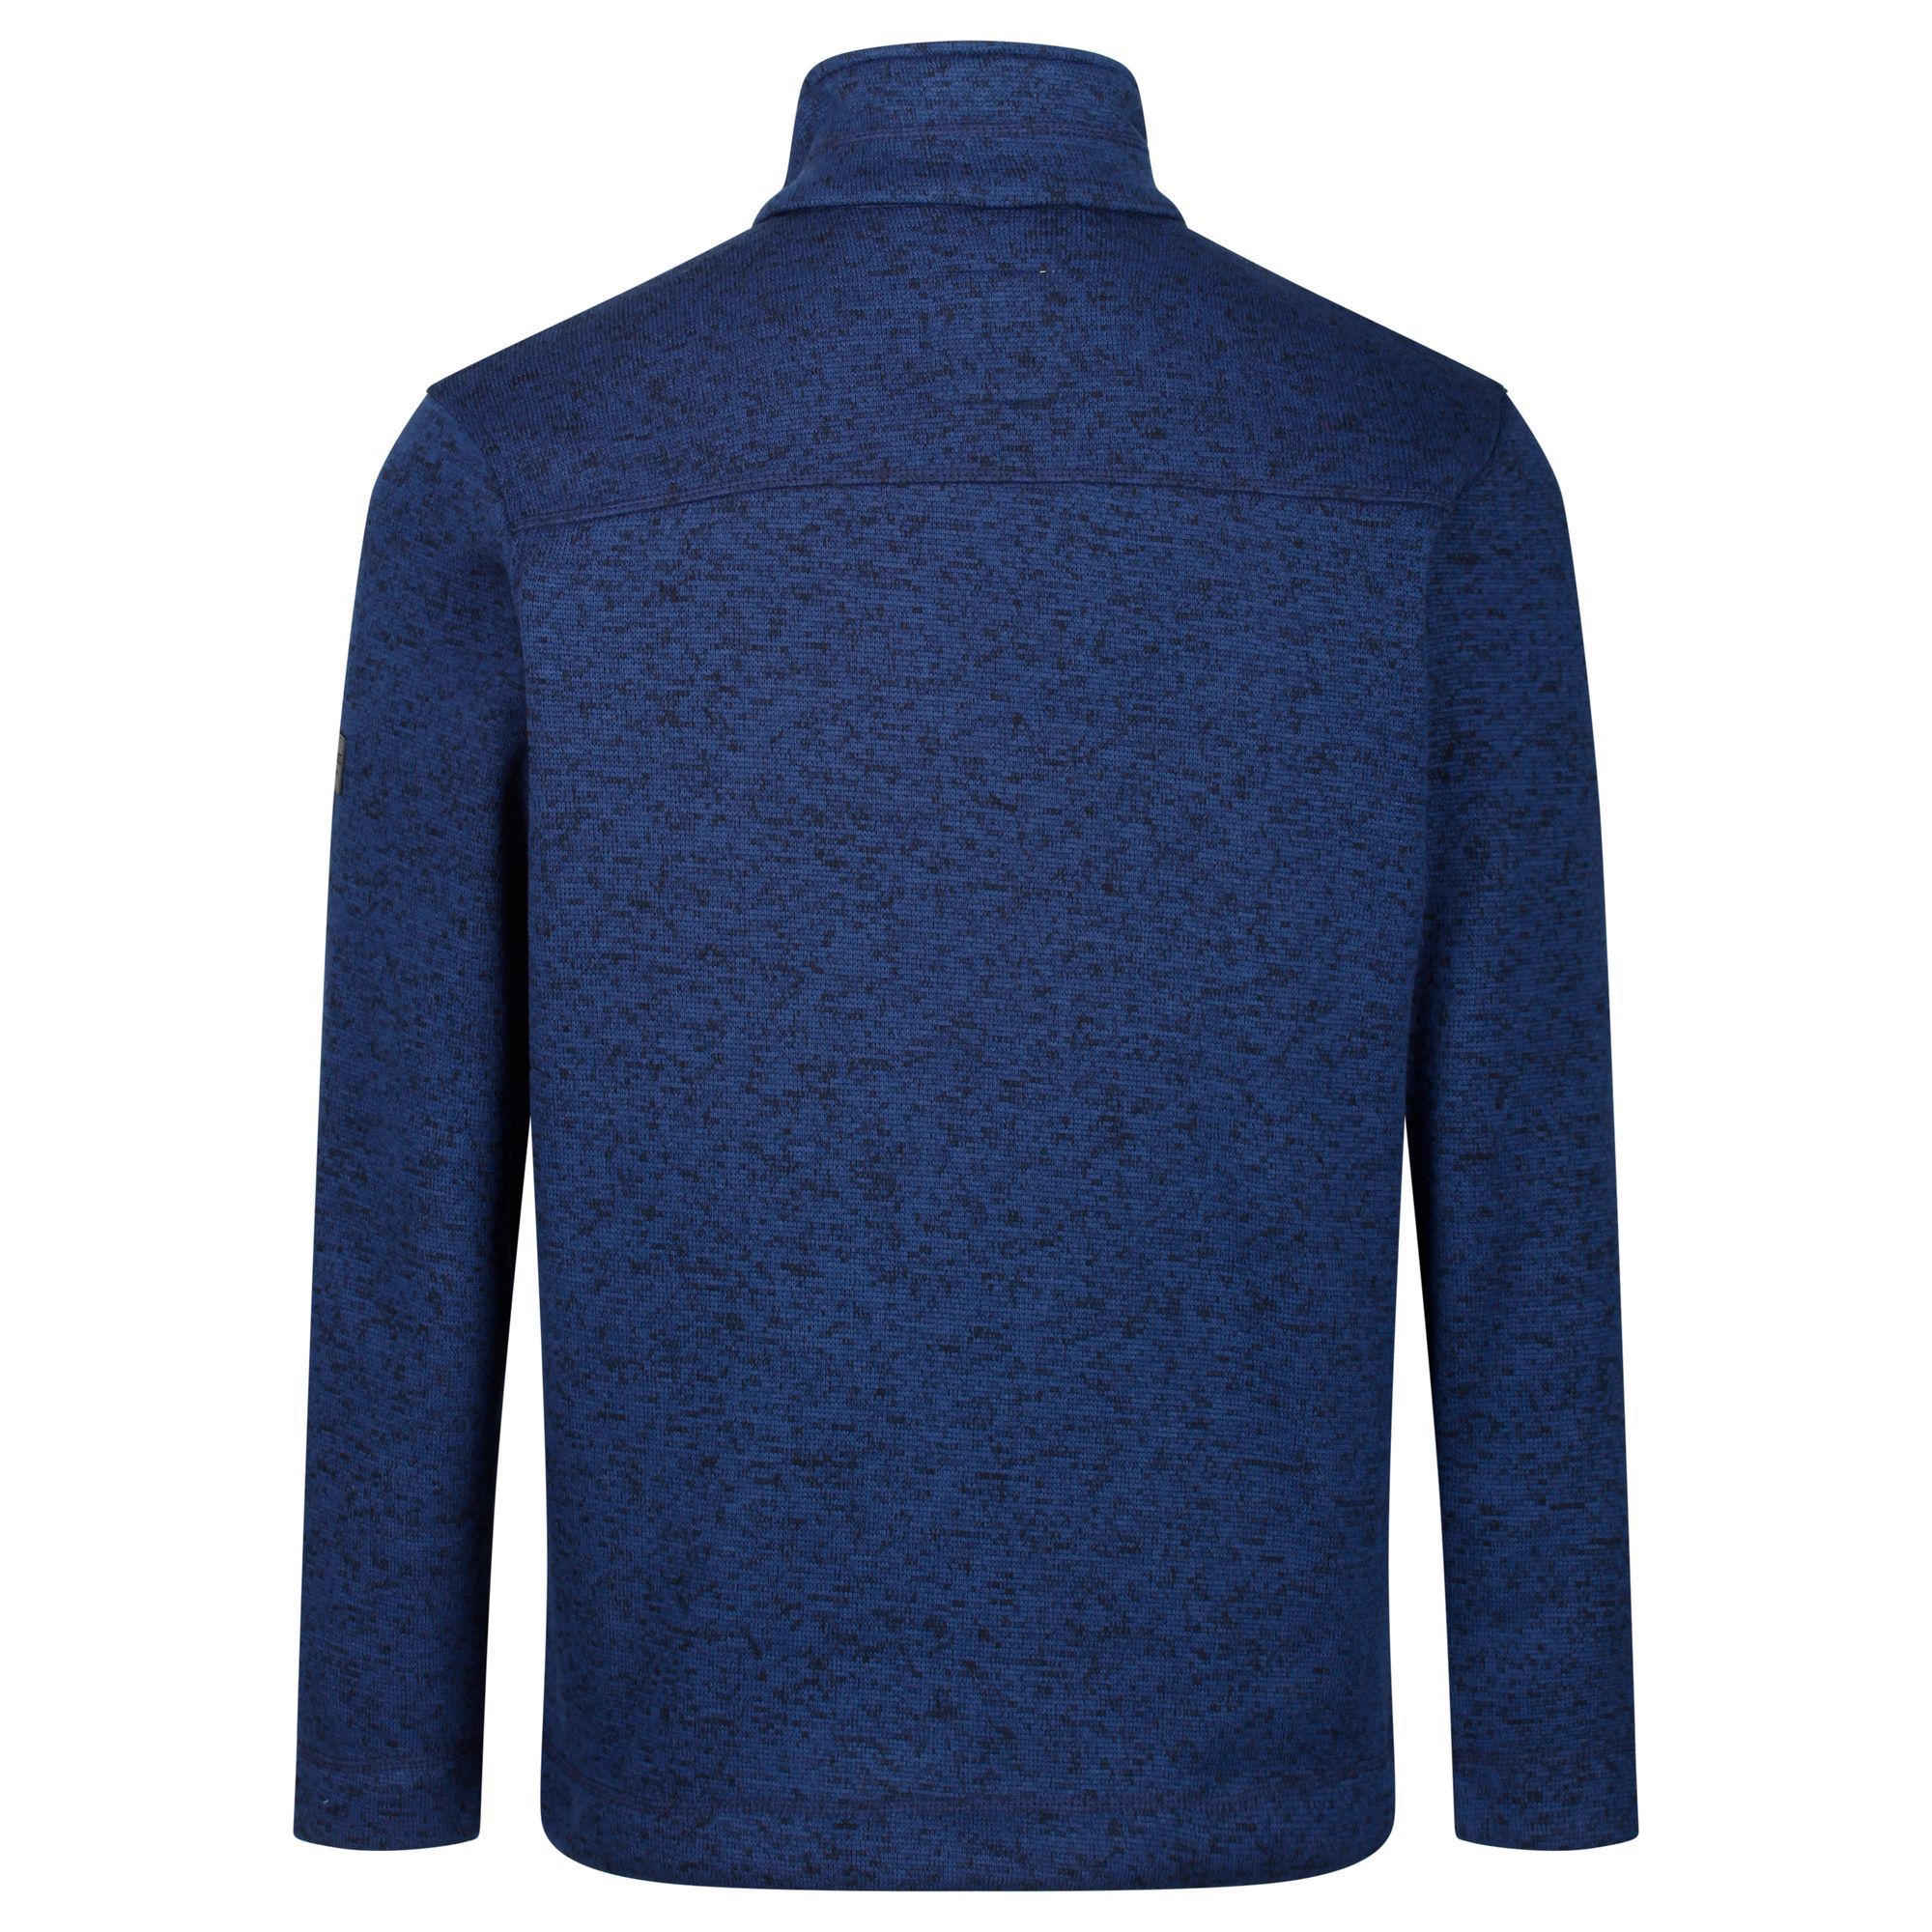 100% polyester marl knit effect fleece. 2 lower pockets. Cut hip length with a breeze blocking stand collar and drawcord hem.